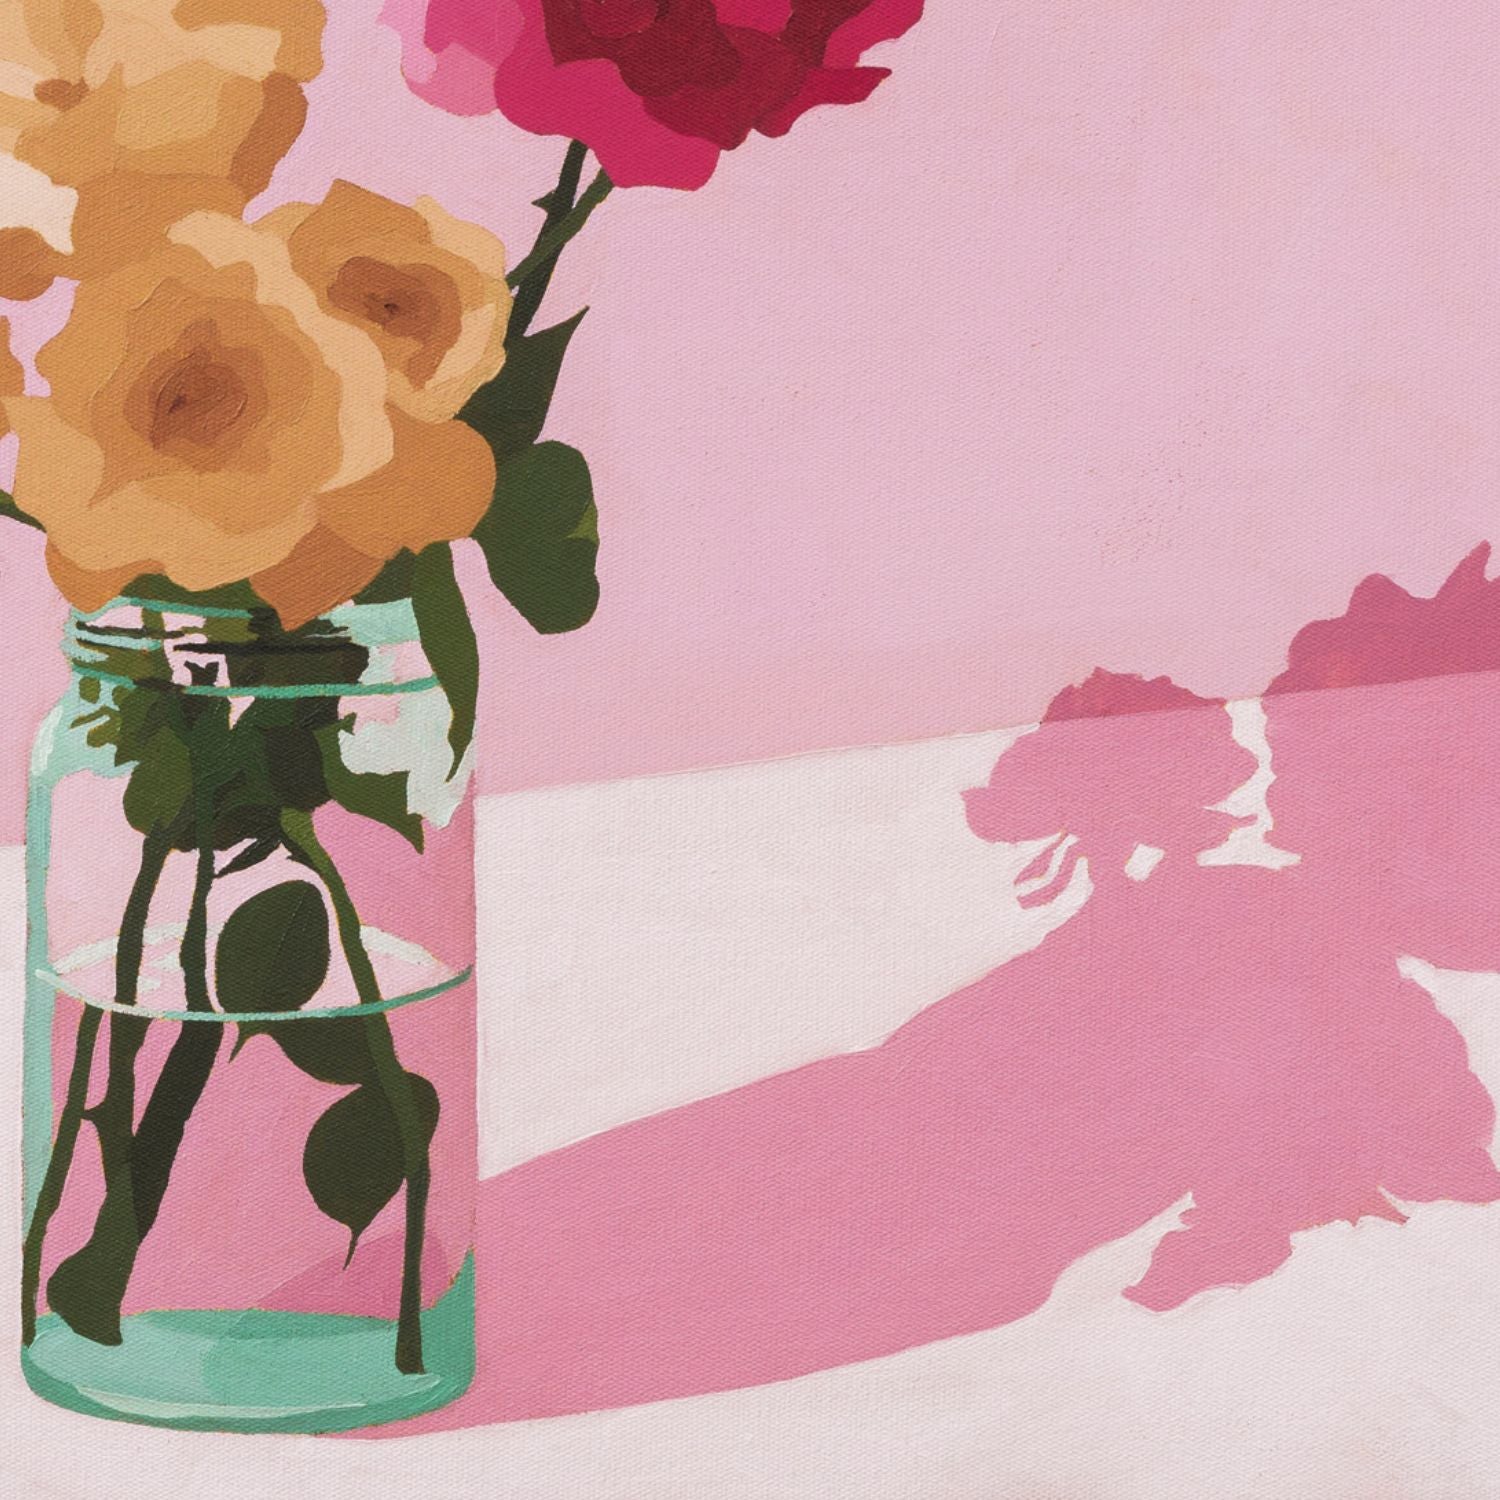 original oil painting of roses in a vase on a soft pink background